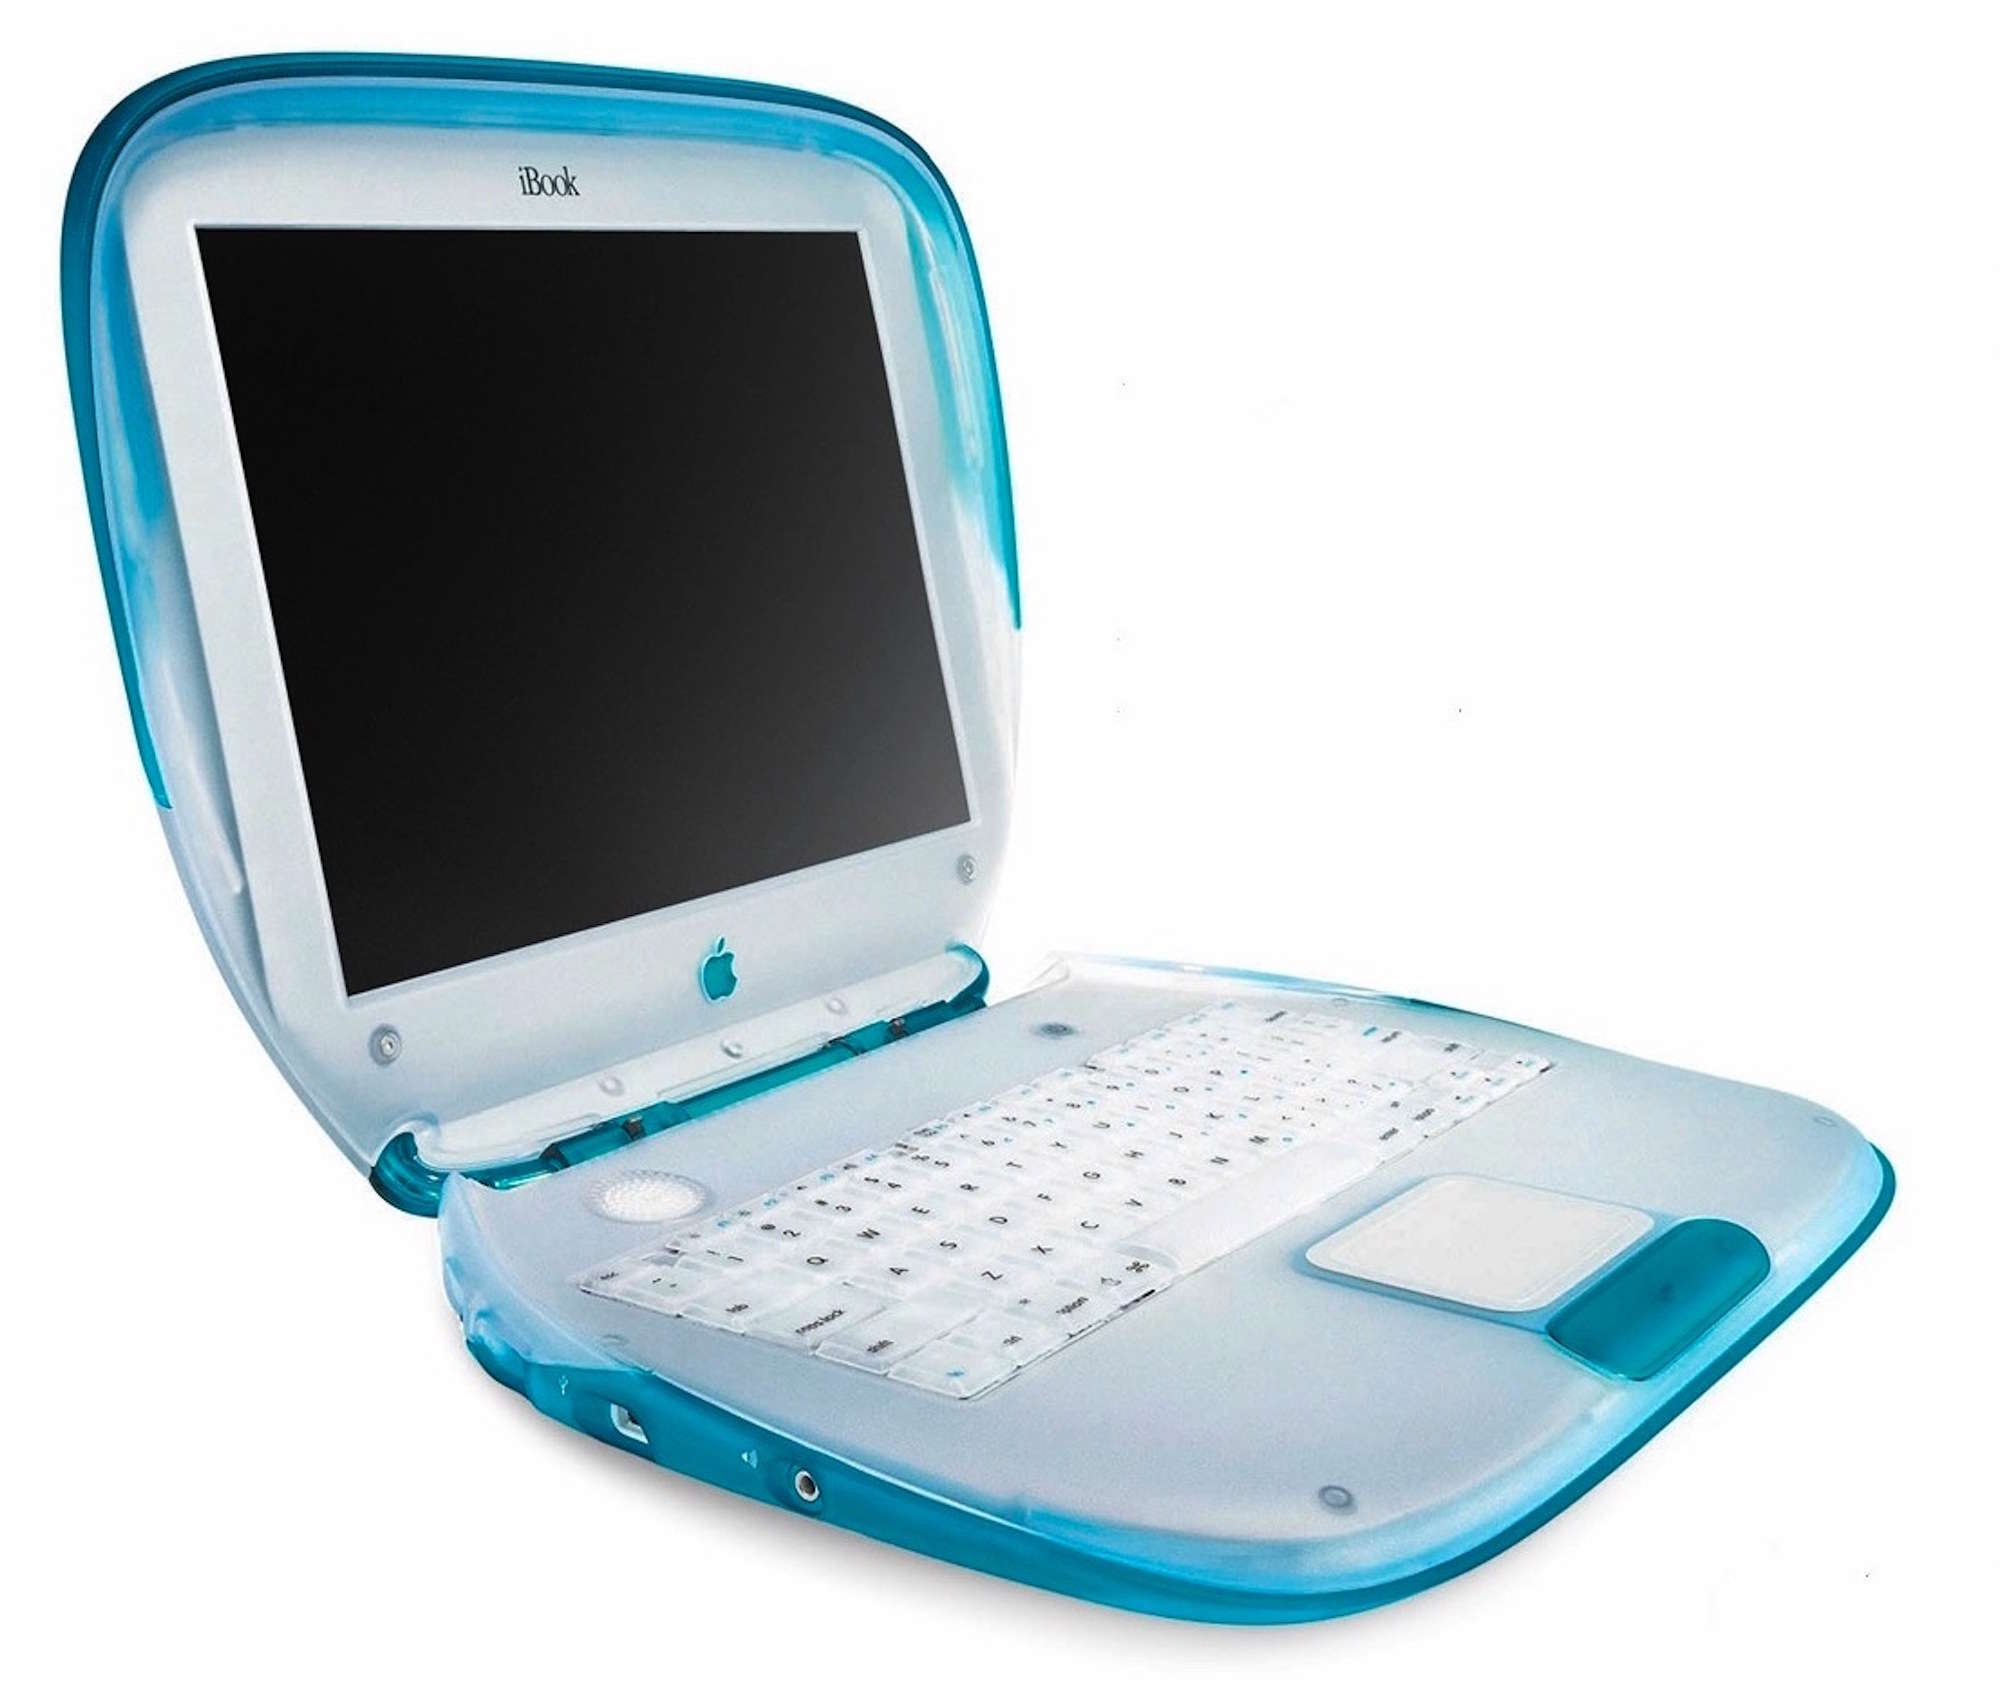 An iBook in the Blueberry color.